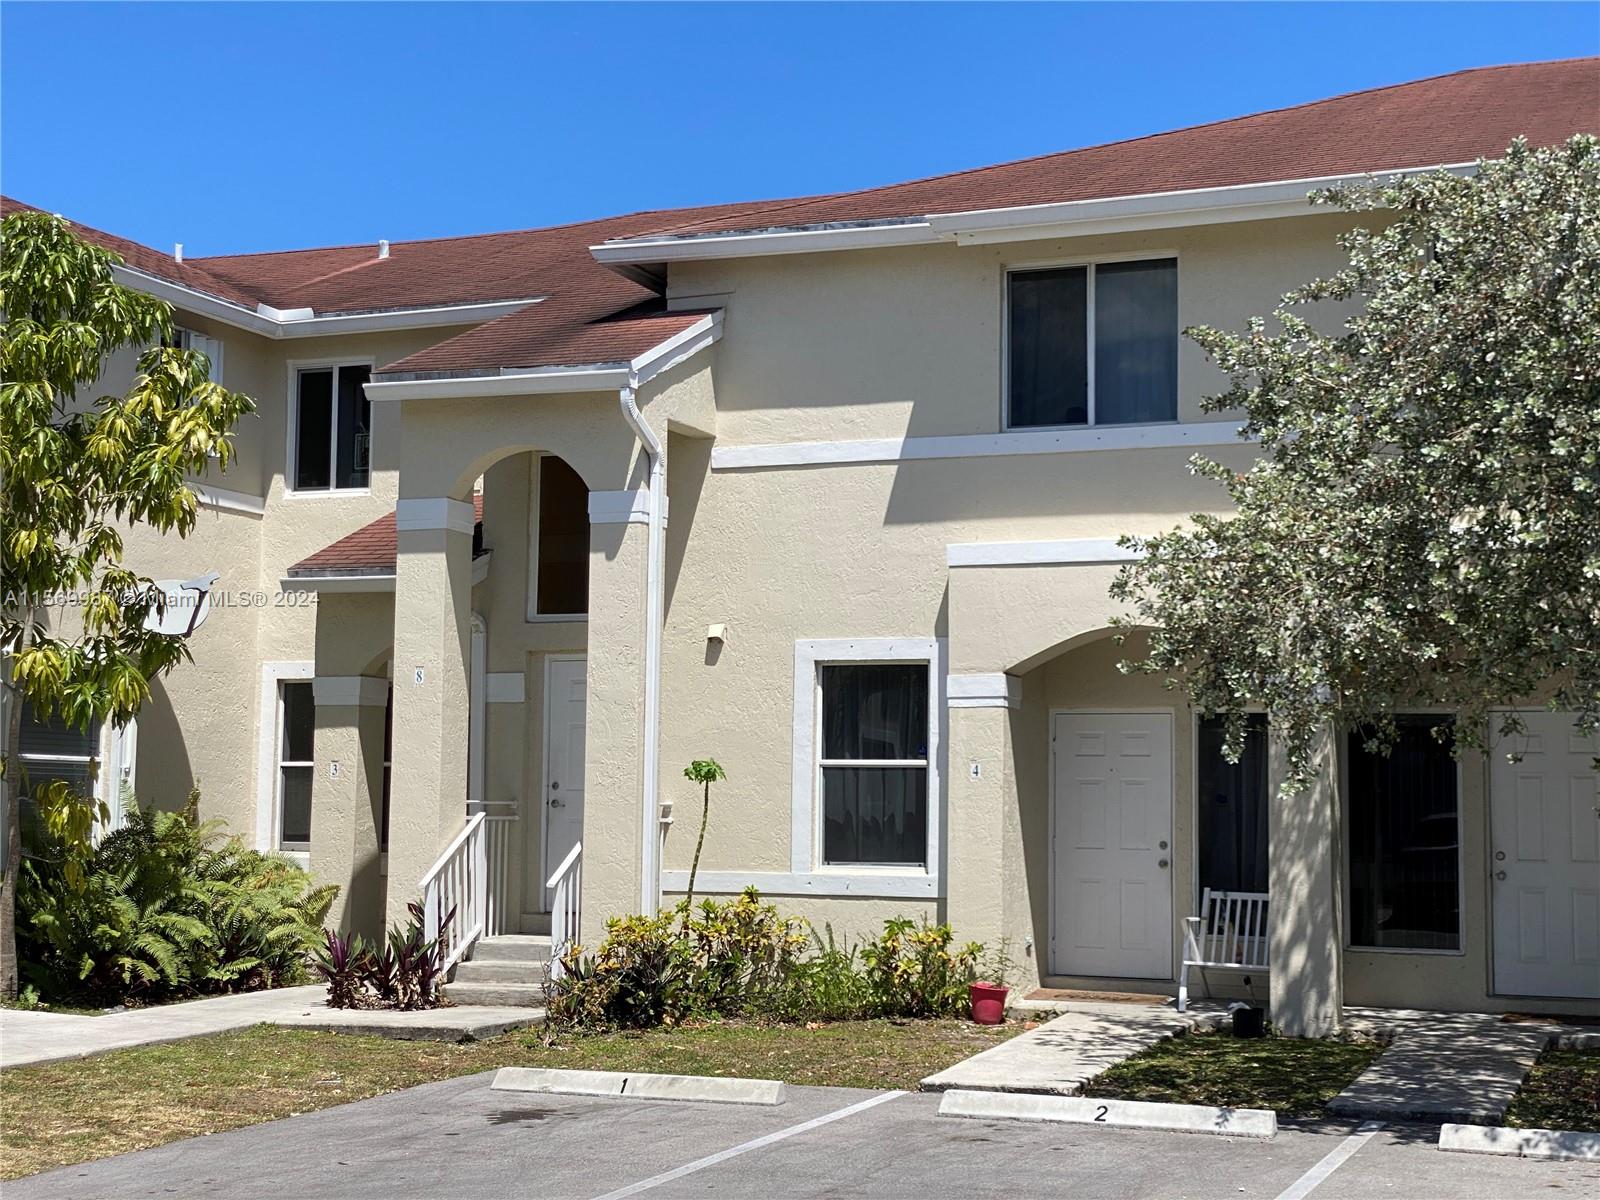 835 NE 212th Ter 4, Miami, Florida 33179, 2 Bedrooms Bedrooms, ,2 BathroomsBathrooms,Residentiallease,For Rent,835 NE 212th Ter 4,A11569987